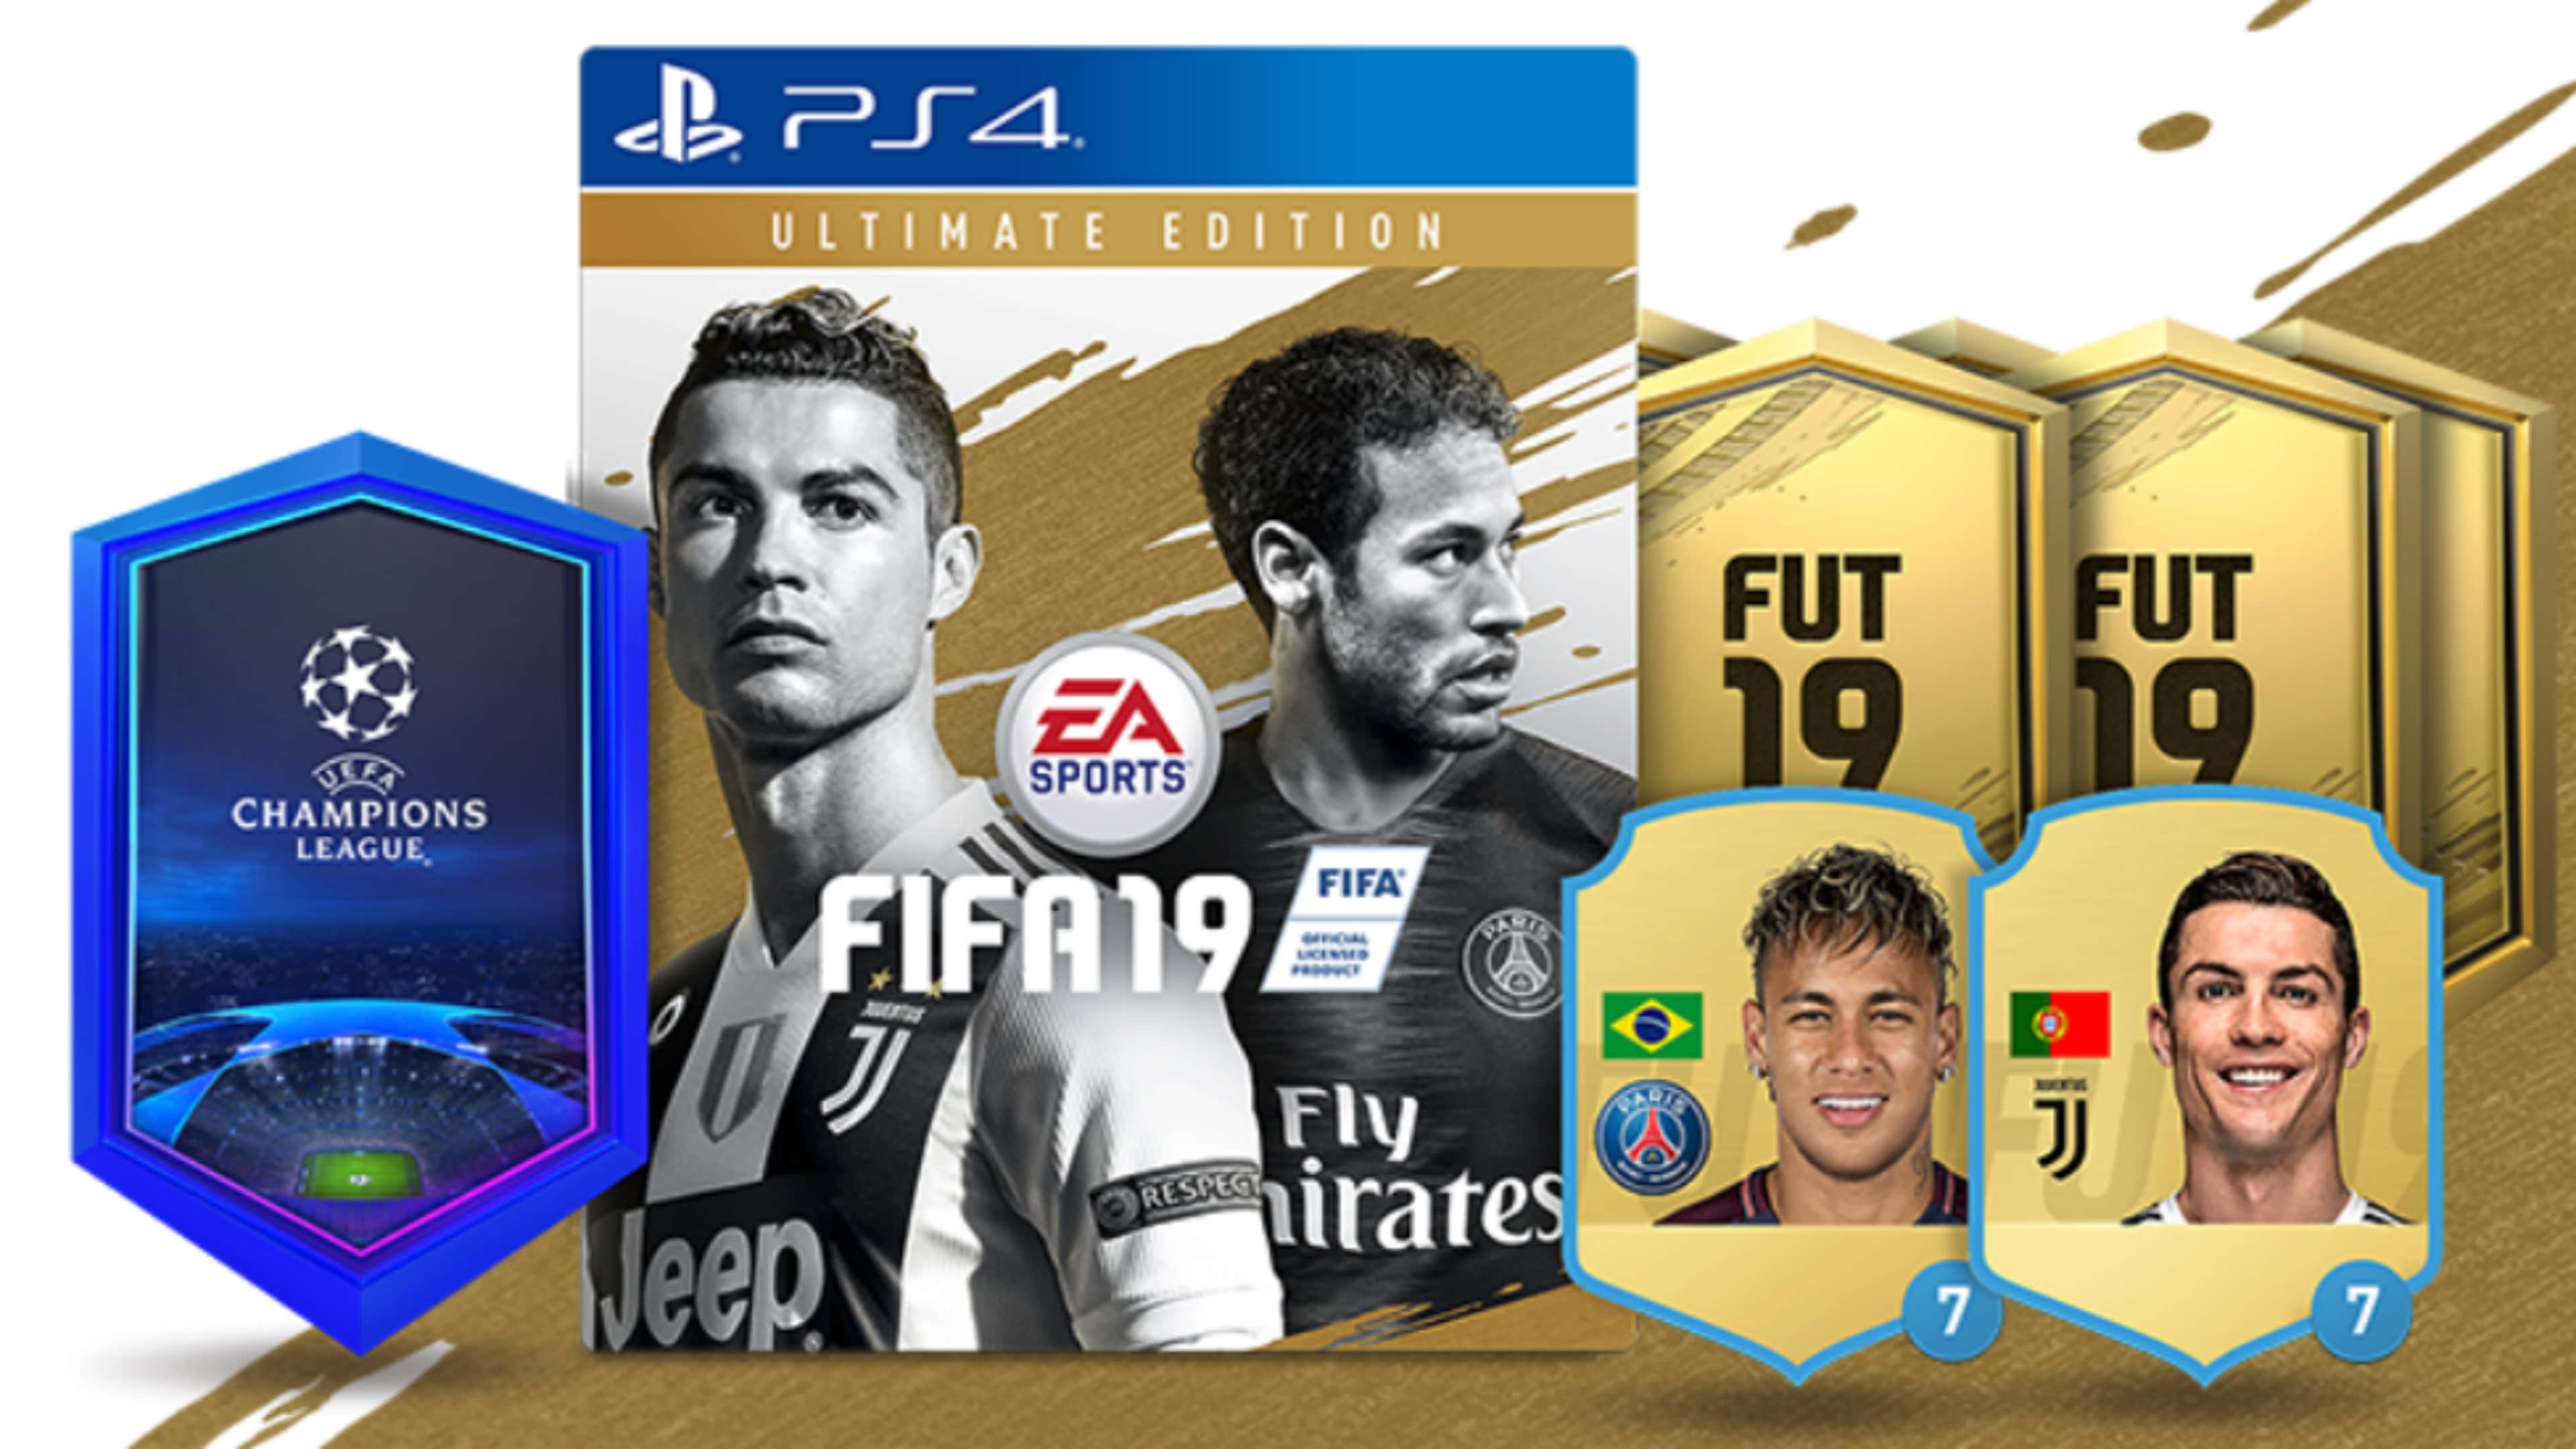 FIFA 23 release date, early access, price, soundtrack, ratings and